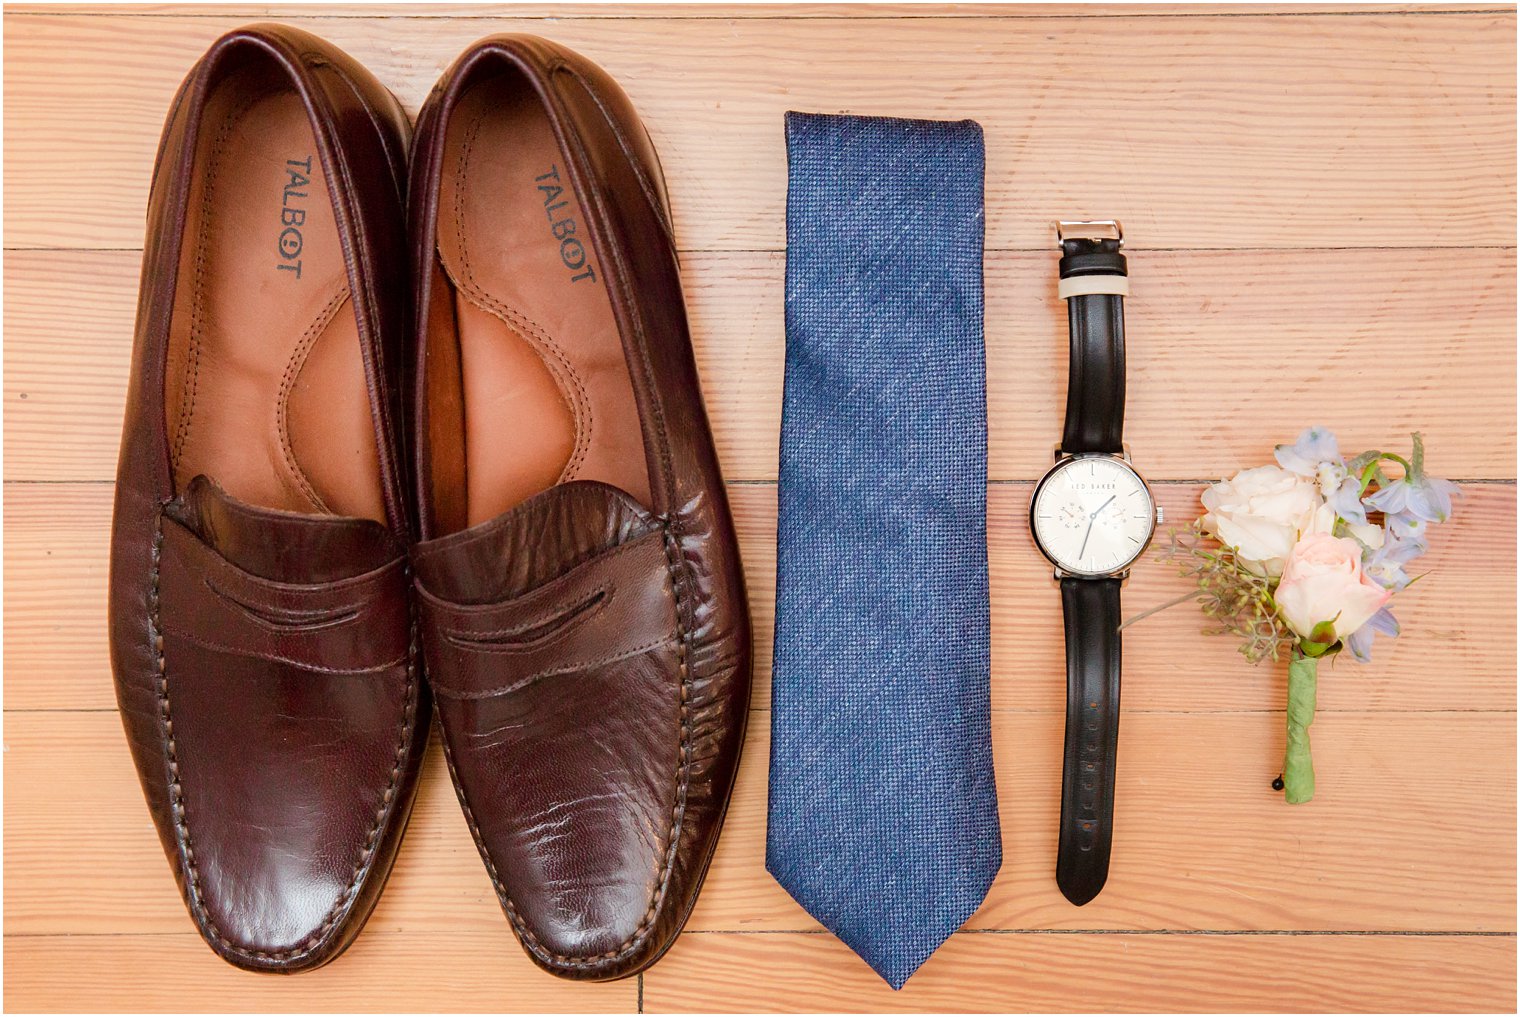 Talbot loafers with groom's details for LBI wedding day